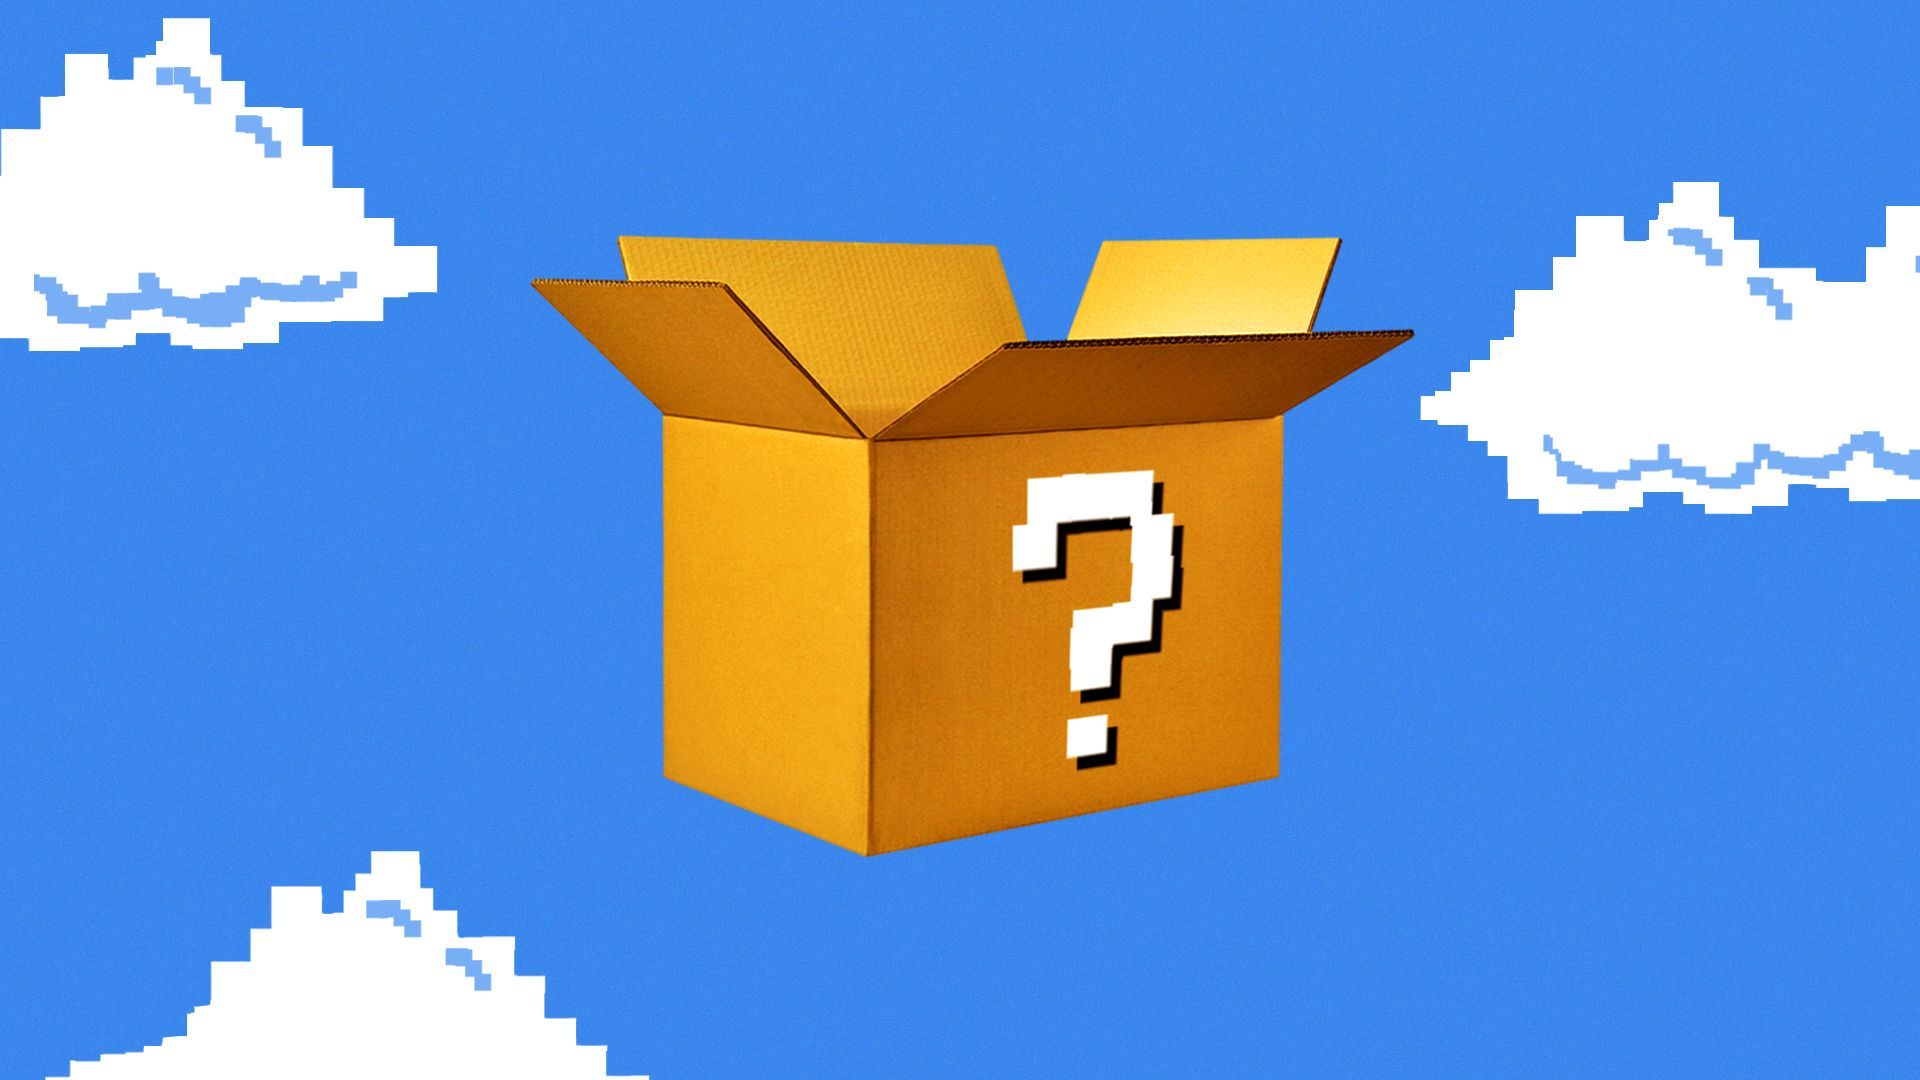 Illustration of a cardboard moving box as a Mario-style mystery box.